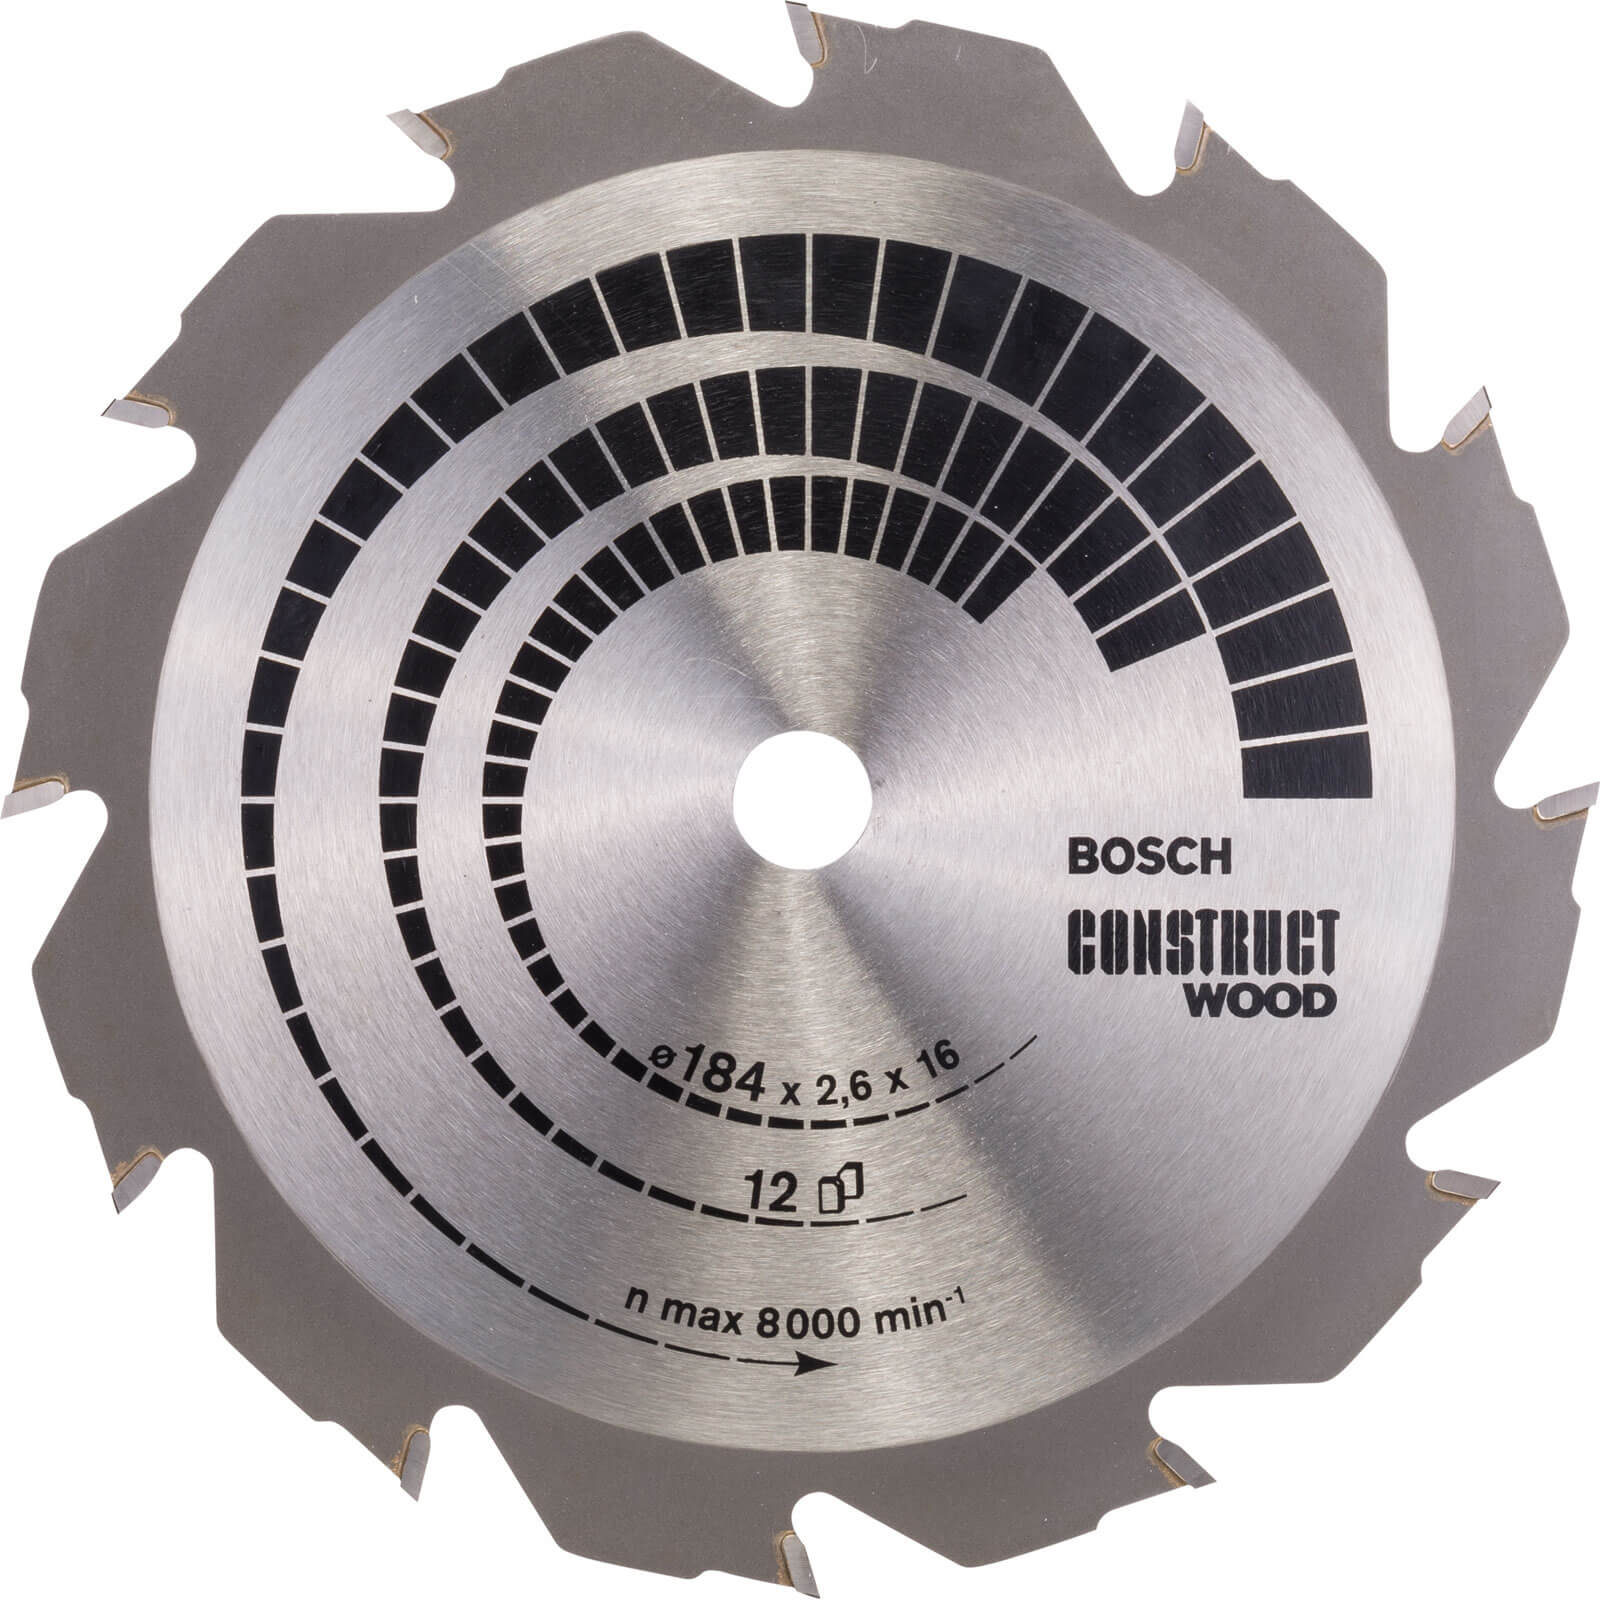 Photo of Bosch Construct Wood Cutting Saw Blade 184mm 12t 16mm